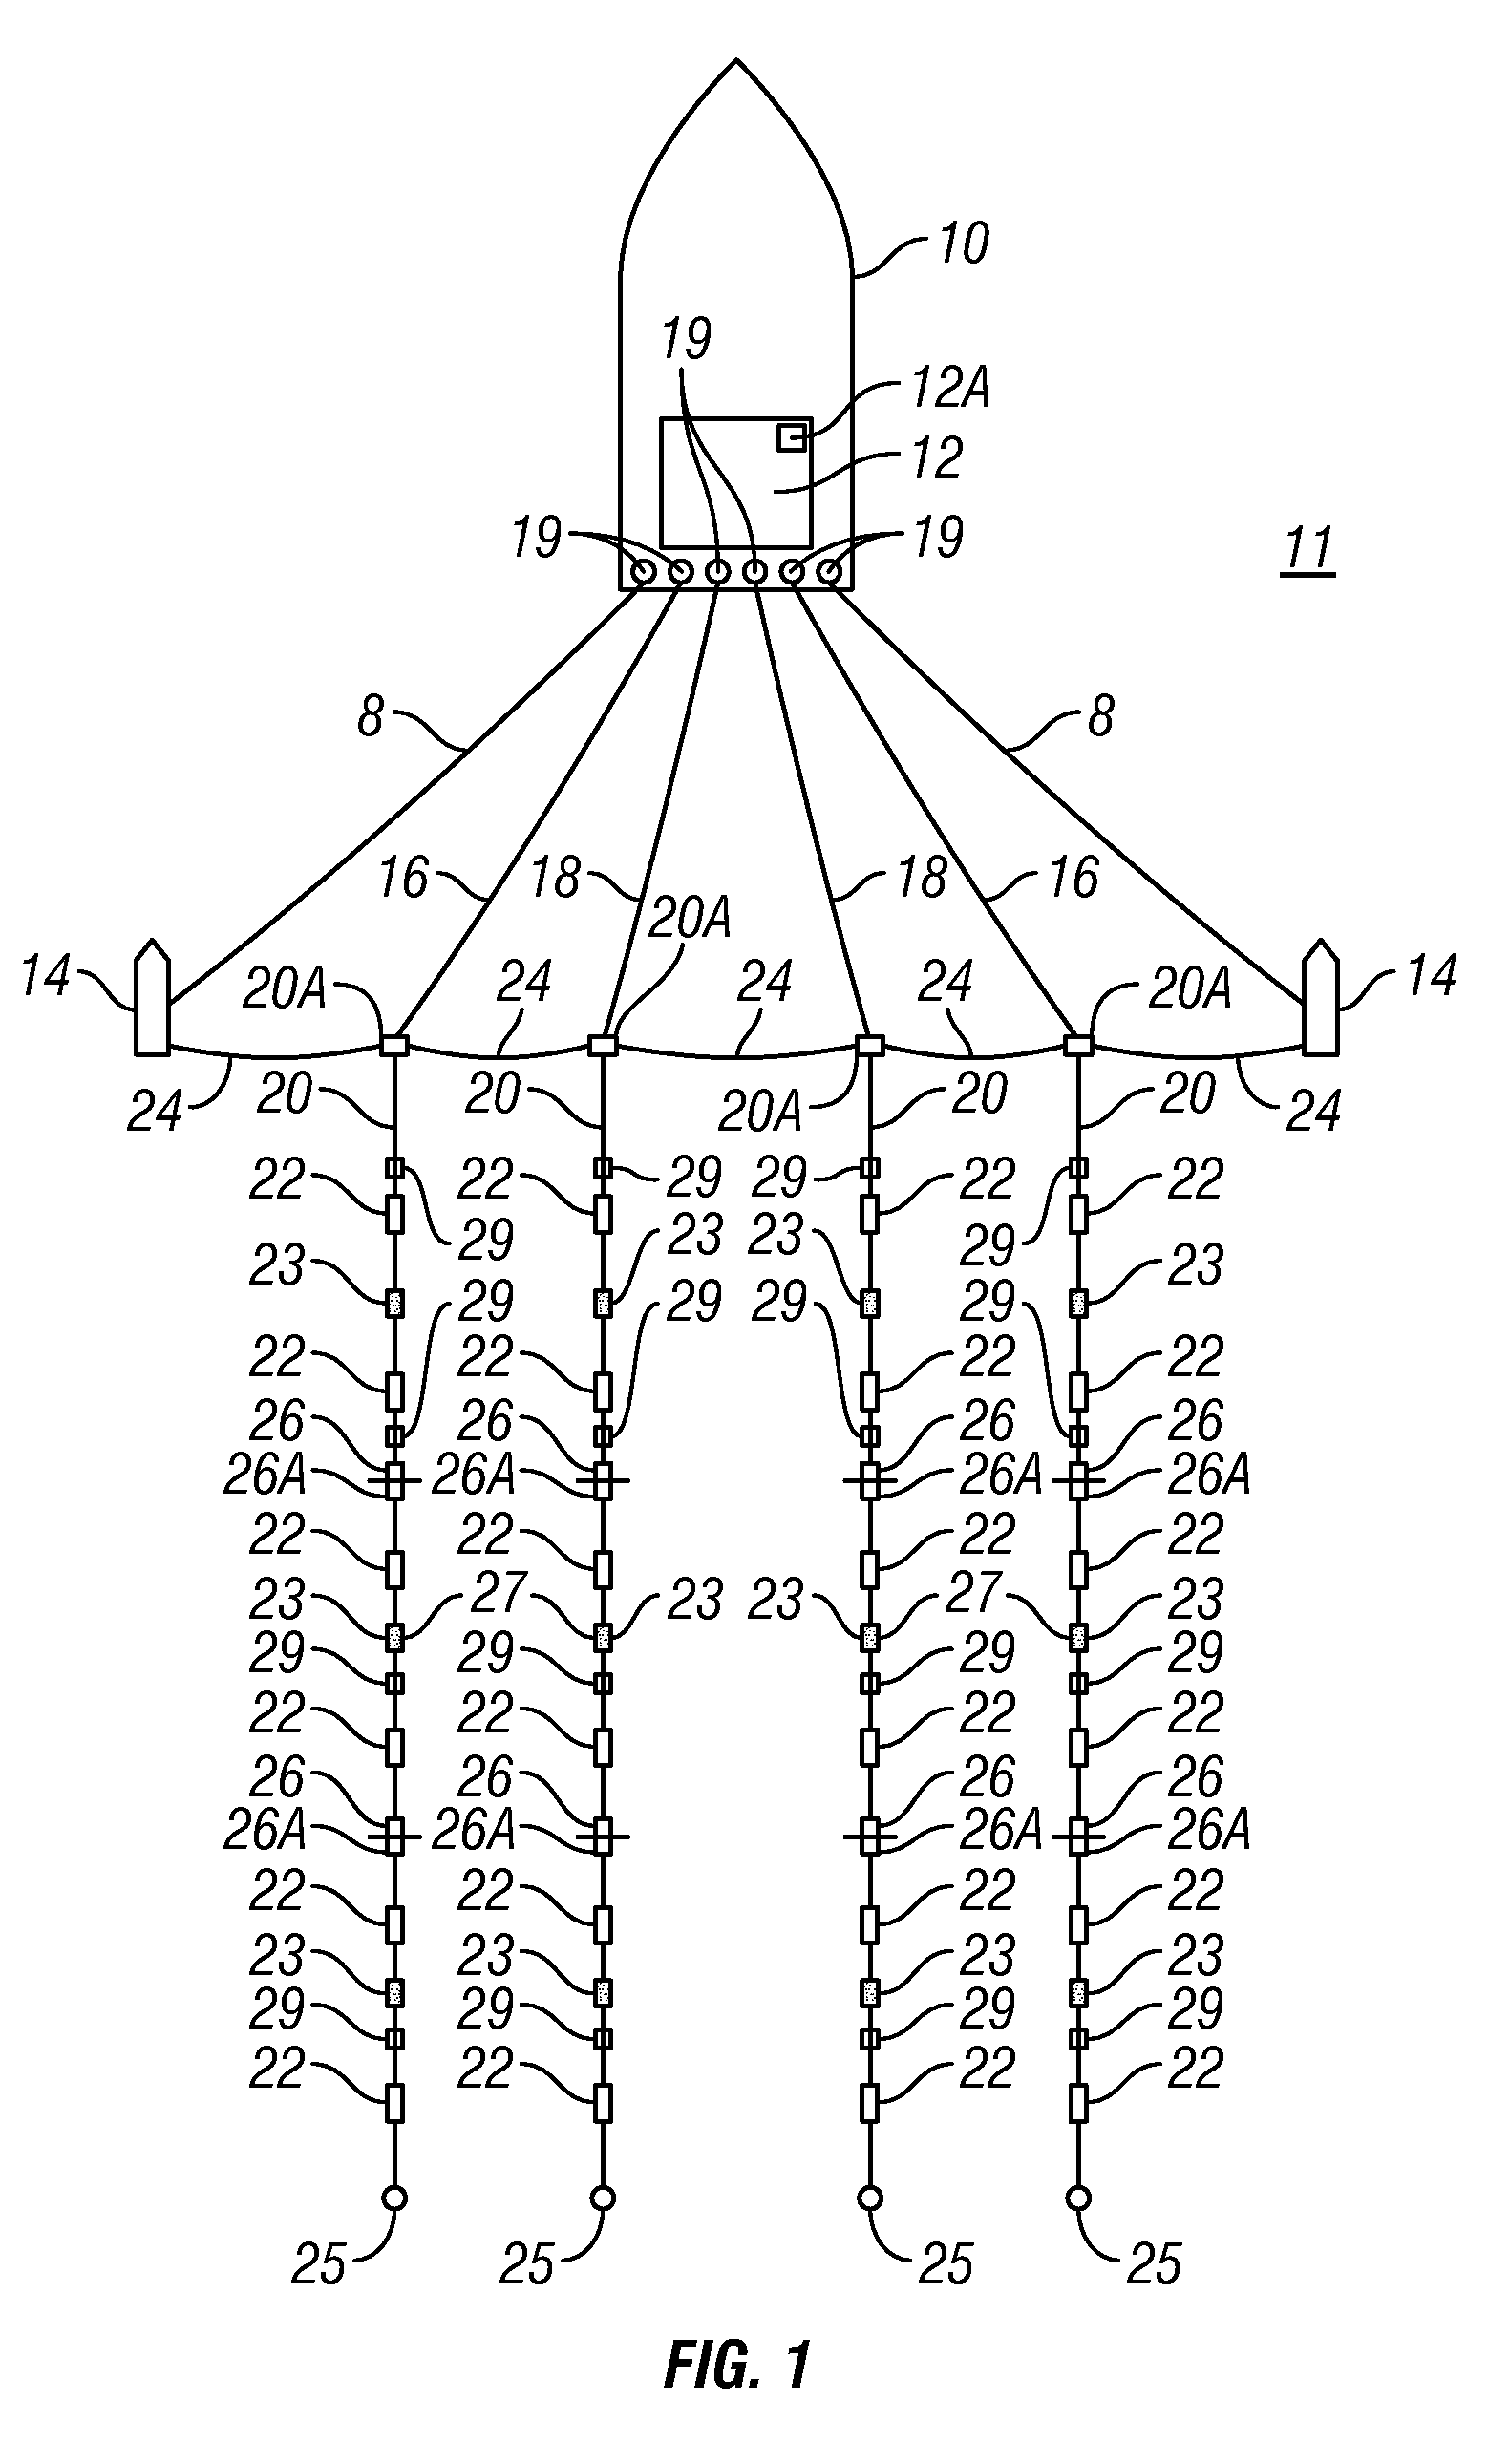 Method for determining adequacy of seismic data coverage of a subsurface area being surveyed and its application to selecting sensor array geometry